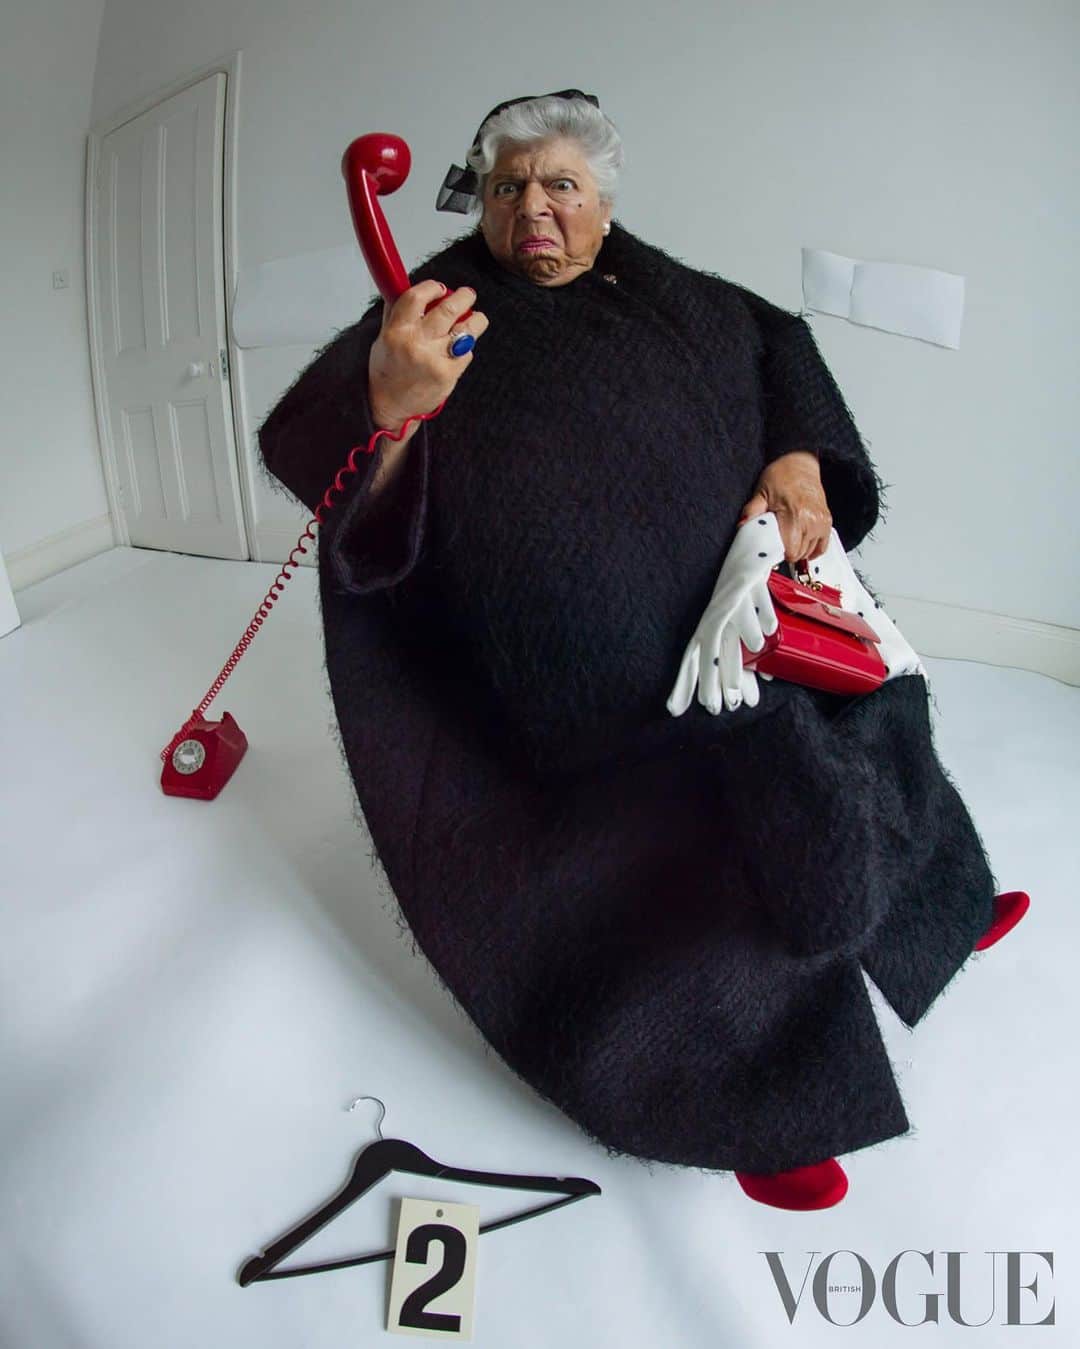 British Vogueさんのインスタグラム写真 - (British VogueInstagram)「“I’m still a bit of a child,” says Miriam Margolyes. “I can’t resist naughtiness.” In #BritishVogue’s July 2023 issue, the actor is at her very best – cheeky, wonderfully candid, and an absolute breath of fresh air. Click the link in bio to read the profile in full, and see the full story in the new issue, on newsstands Tuesday 20 June.  #MiriamMargolyes photographed by #TimWalker and styled by @KPhelan123, with hair by @AliPirzadeh, make-up by @BeaSweetBeauty, nails by @Simmy_NailsAndBeauty, set design by @MigsBento and production by @Zoe_Wassall at @GreatSouthernProductions, with thanks to @GeorgeN49.  [Image Description: Image one shows Miriam Margolyes, a white woman with silver hair sitting down at a table covered in white doily lace in an all-white room. She is shown from the waist up, and is naked except for pearl earrings, a pearl necklace and a blue cocktail ring. She is also wearing red nail varnish, a dark pink lipstick and has a small beauty spot drawn under the outer edge of her left eye. She is looking into the camera and smiling. In front of her sit two clear cake stands which hold piles of cherry Bakewell tarts, which cover her nipples. In between the stands is a floral saucer and teacup, with a small amount of tea inside.  Image two shows Miriam Margolyes, a white woman with silver hair, sitting in an all-white room. She is wearing a black headband, gold and pearl earrings, and a black coat. She has pink lipstick on, and is smiling into the camera.  Image three shows Miriam Margolyes, a white woman with silver hair standing in an all-white room. She is wearing a long black dress, a blue coat, a blue cocktail ring, pearl earrings, a pearl necklace, and red shoes which match her red nail varnish and red lipstick. She is looking just off camera and smiling, and in her right hand is a card with the number “3” on it. On the floor to her right is a black hanger, a red hat, red shoes, a black hat with a white bow, a houndstooth coat and cards with the numbers “1”, “7” and “9” on it.  Continued in pinned comments.]」6月14日 0時15分 - britishvogue